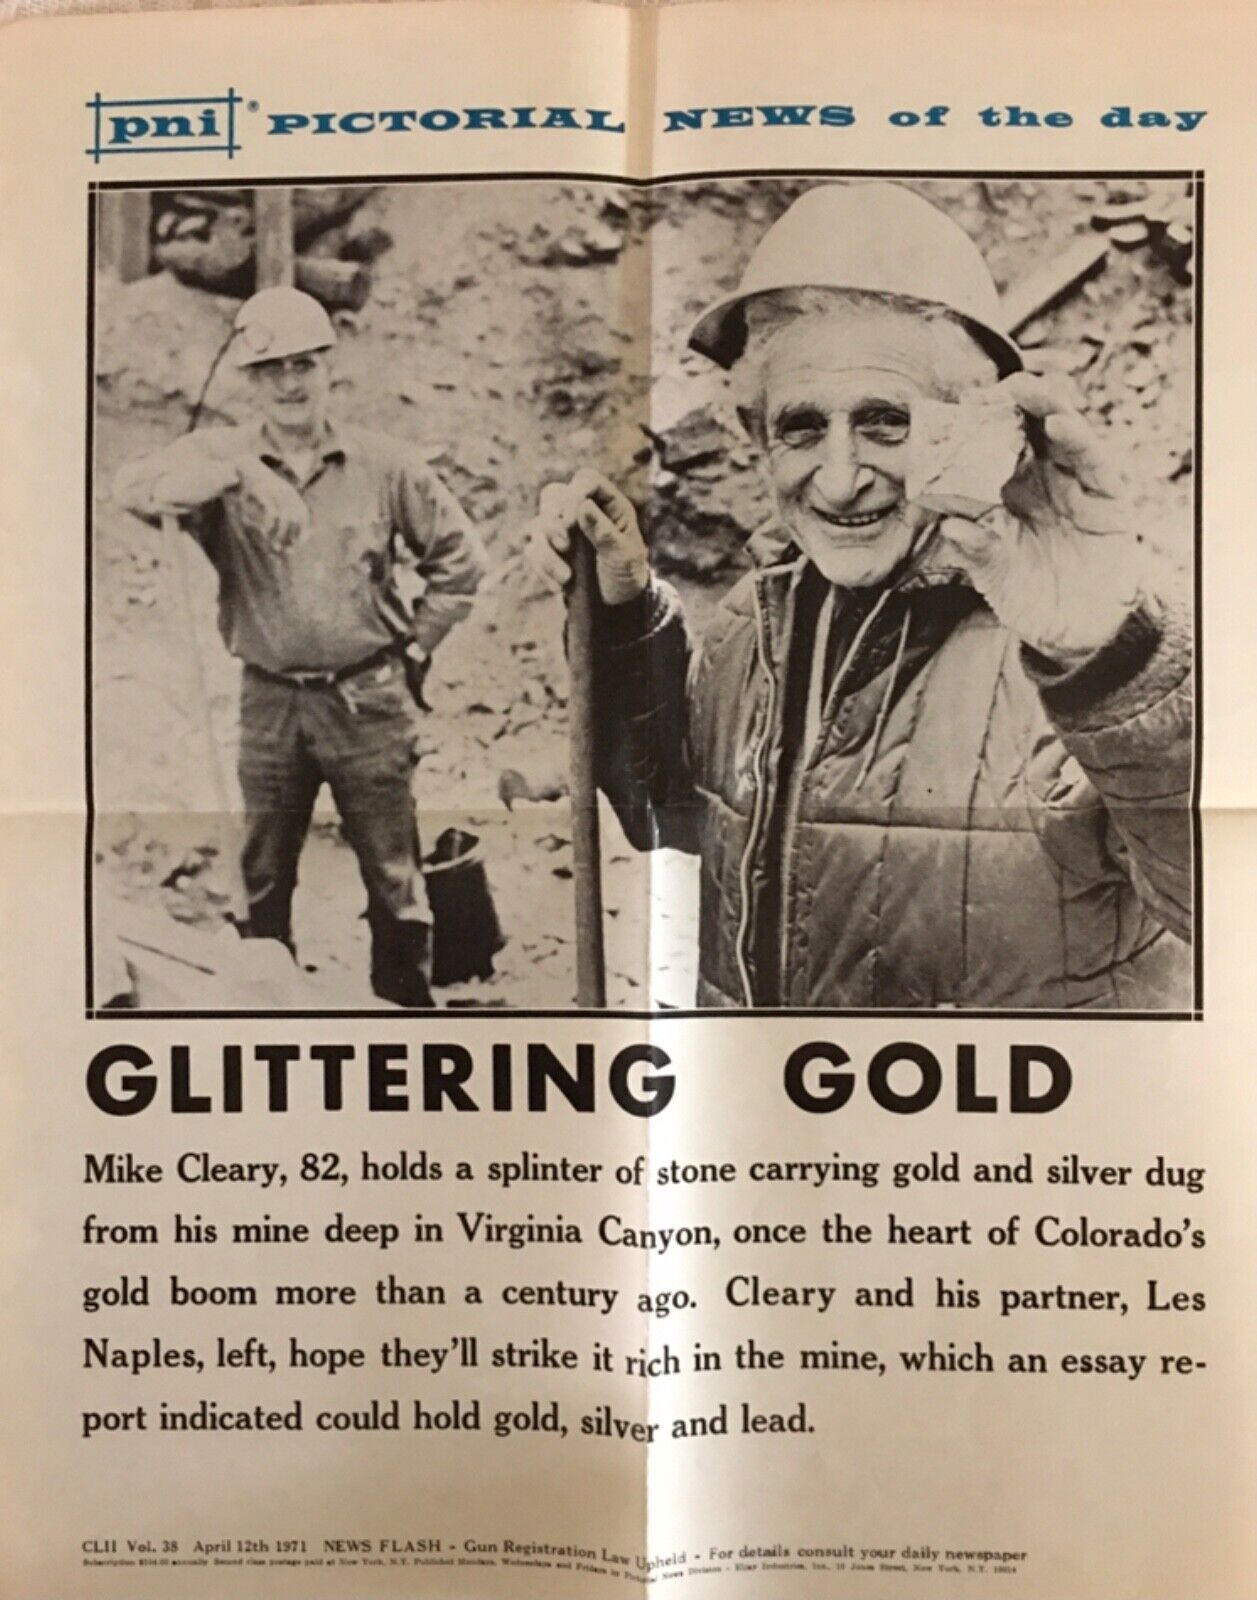 14 X 17 PNI Pictorial News of the Day Poster Glittering Gold Mike Cleary